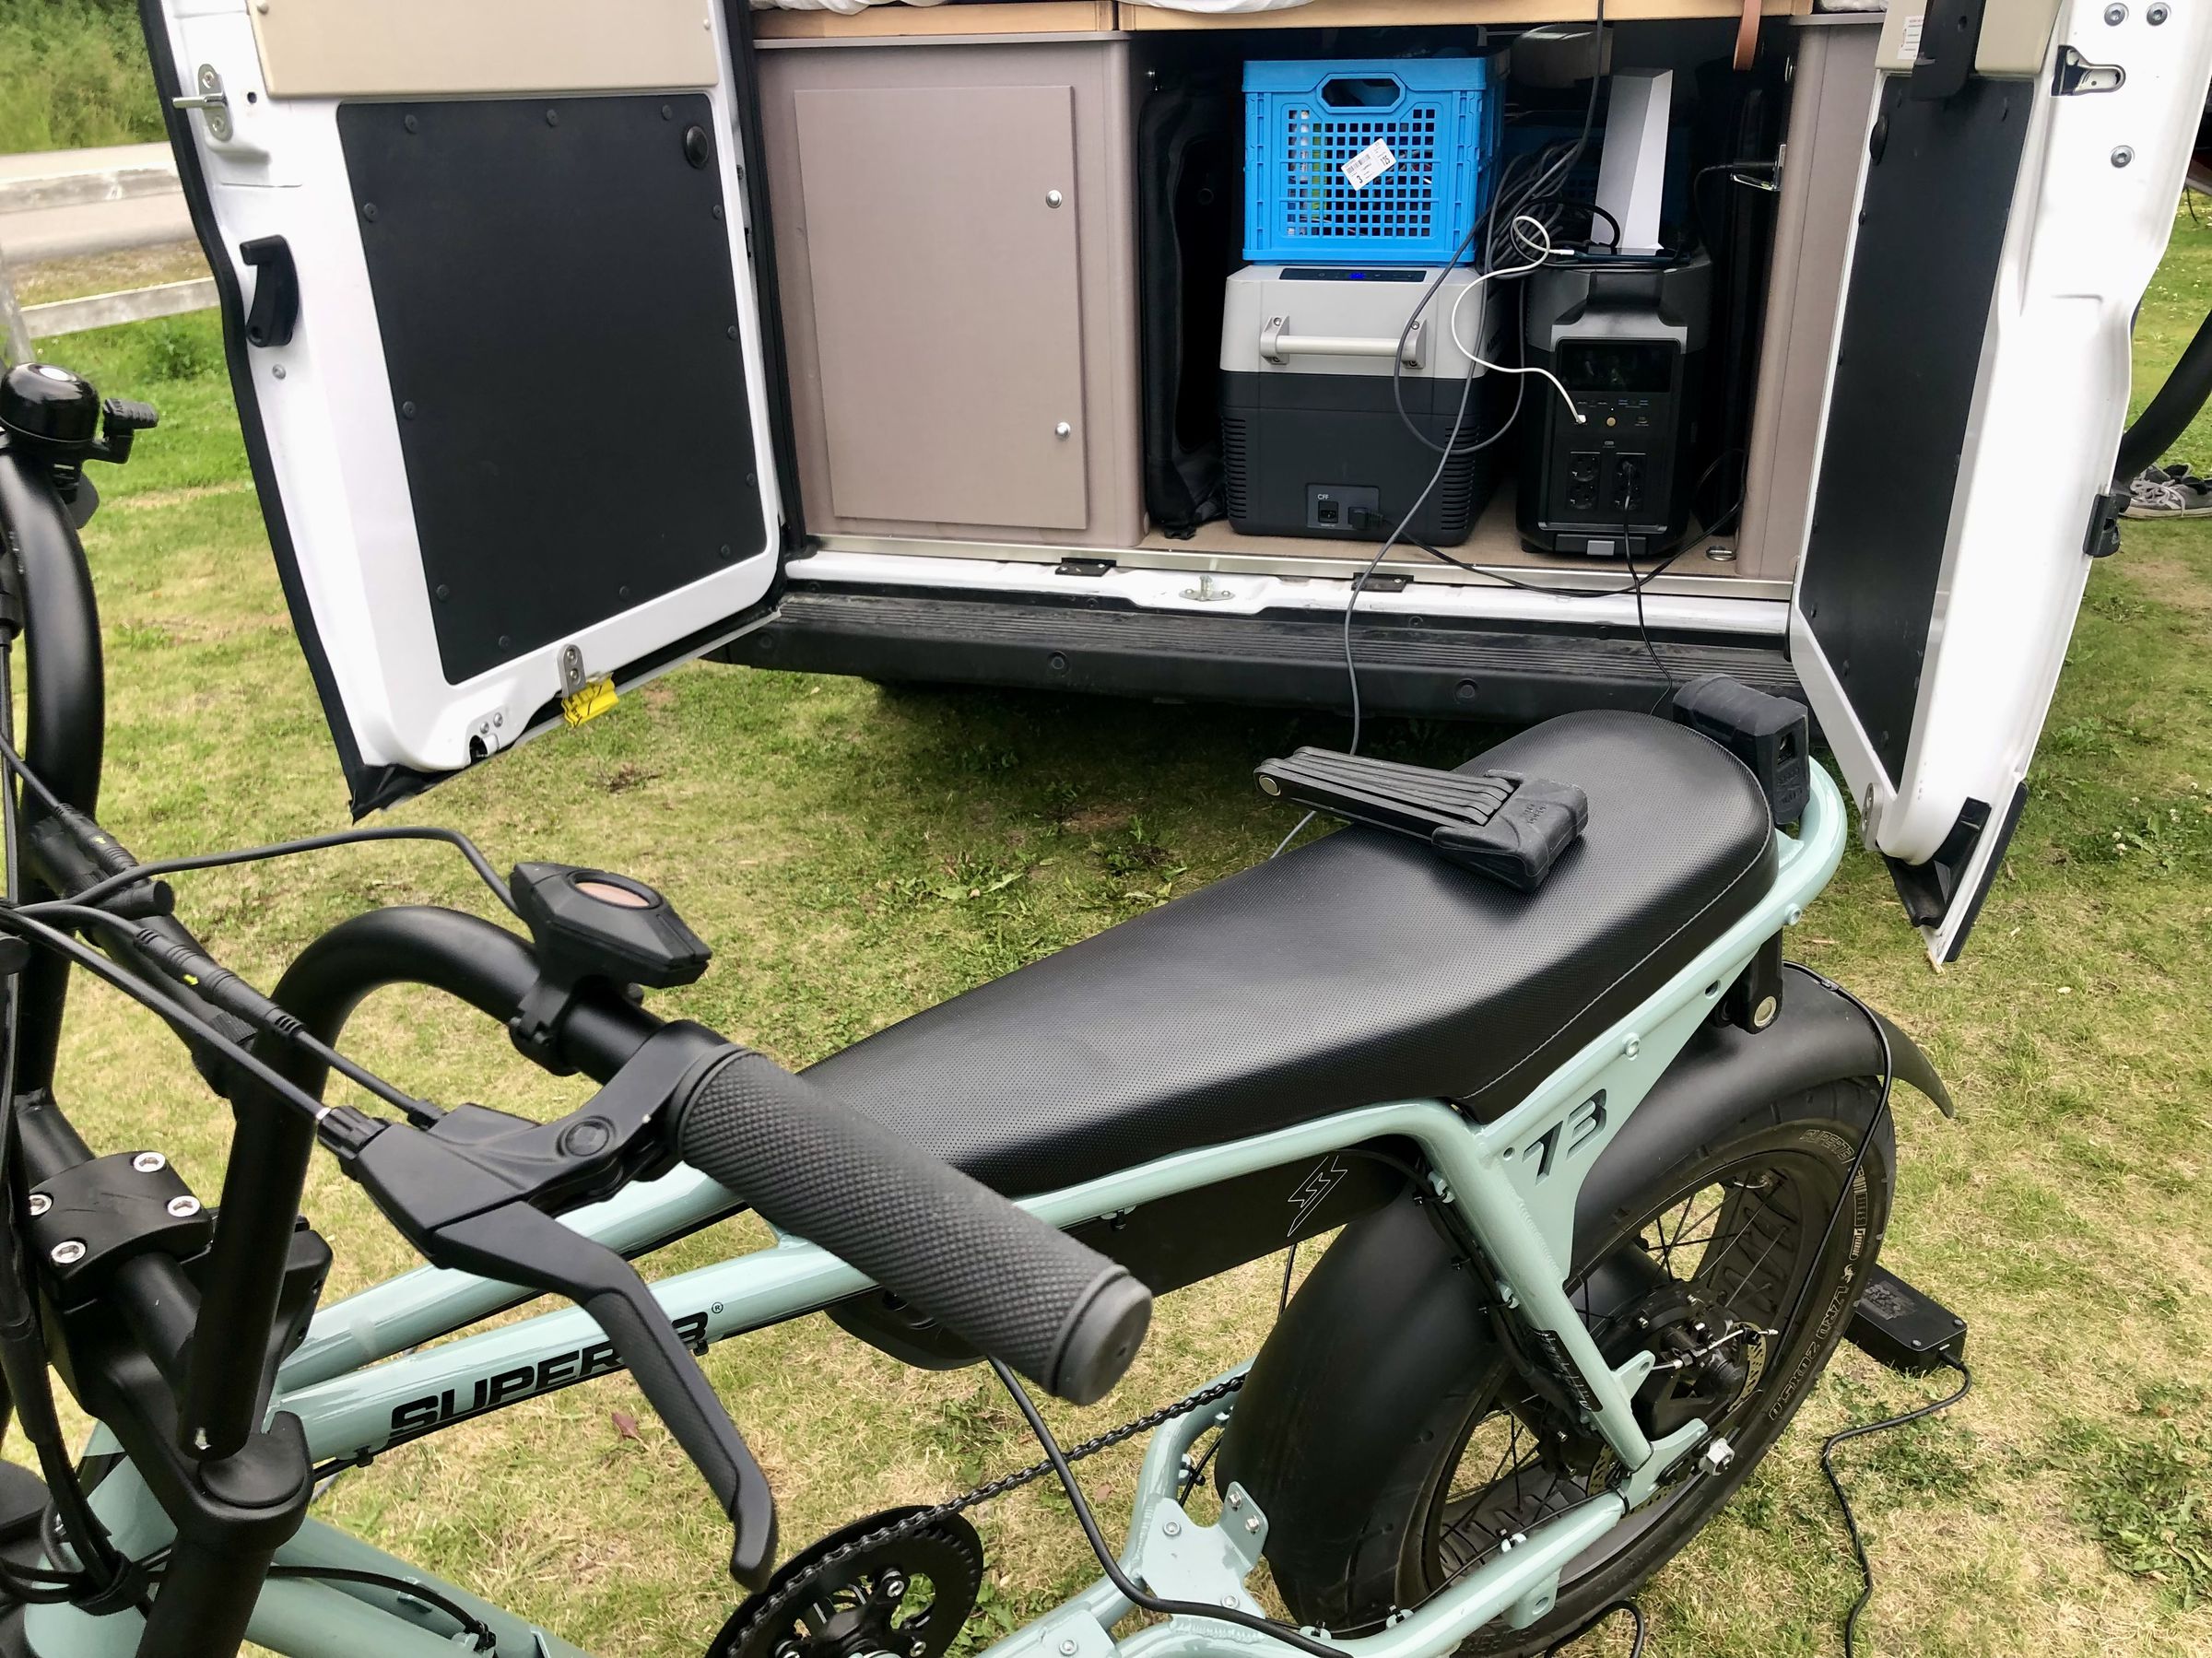 Charging a Super73 e-bike with the battery still connected. The 400W solar panel is slotted into the van to the right of the Delta Pro.